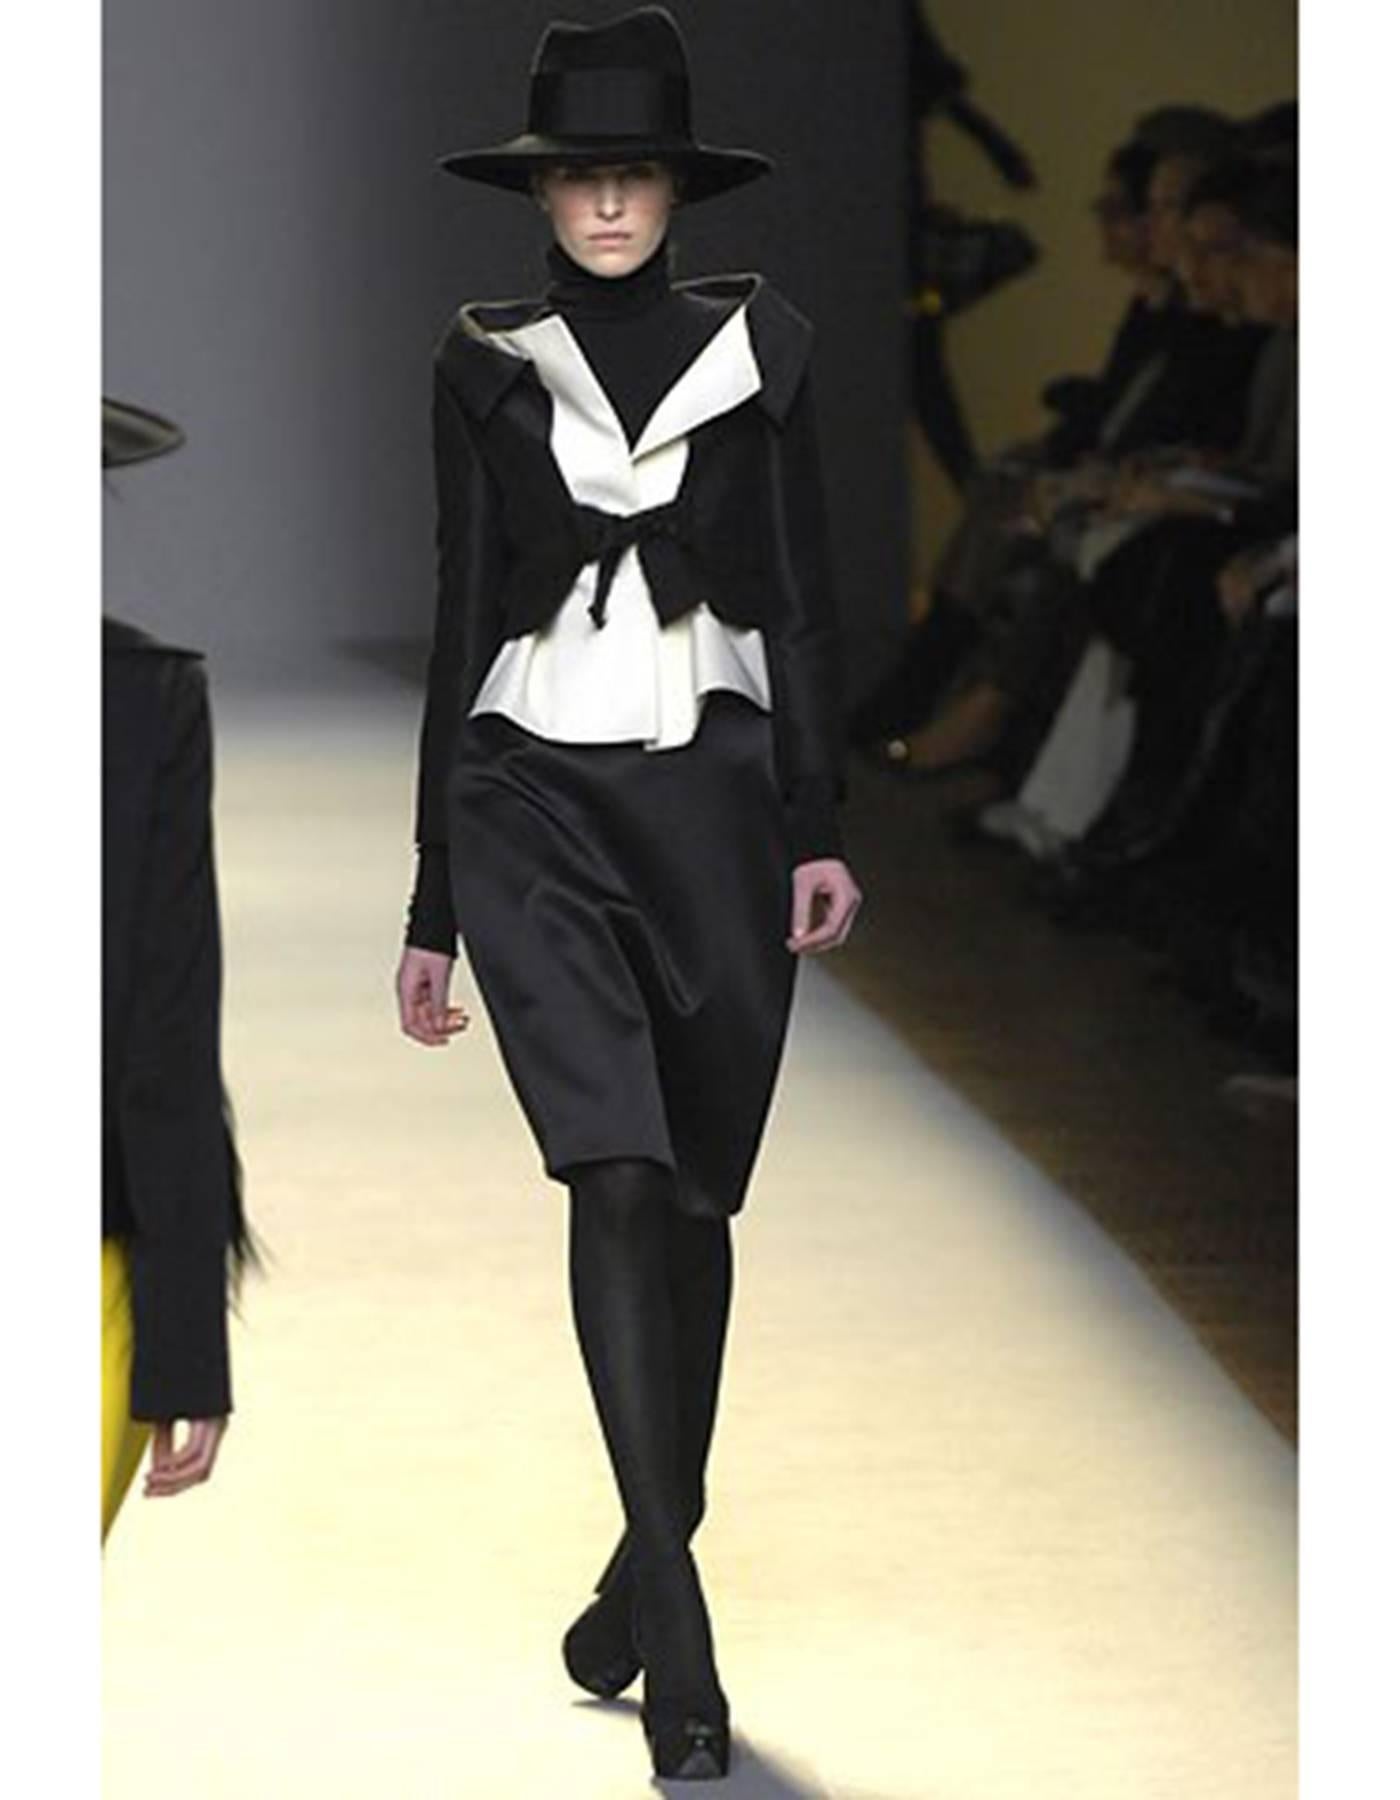 Giambattista Valli Fall '07 Runway Black & Ivory Silk Cropped Jacket
Made In: Italy
Color: Black and ivory
Composition: 58% virgin wool, 17% wool, 13% silk, 12% mohair
Lining: Ivory, 61% acetate, 39% rayon
Closure/Opening: Center waist tie